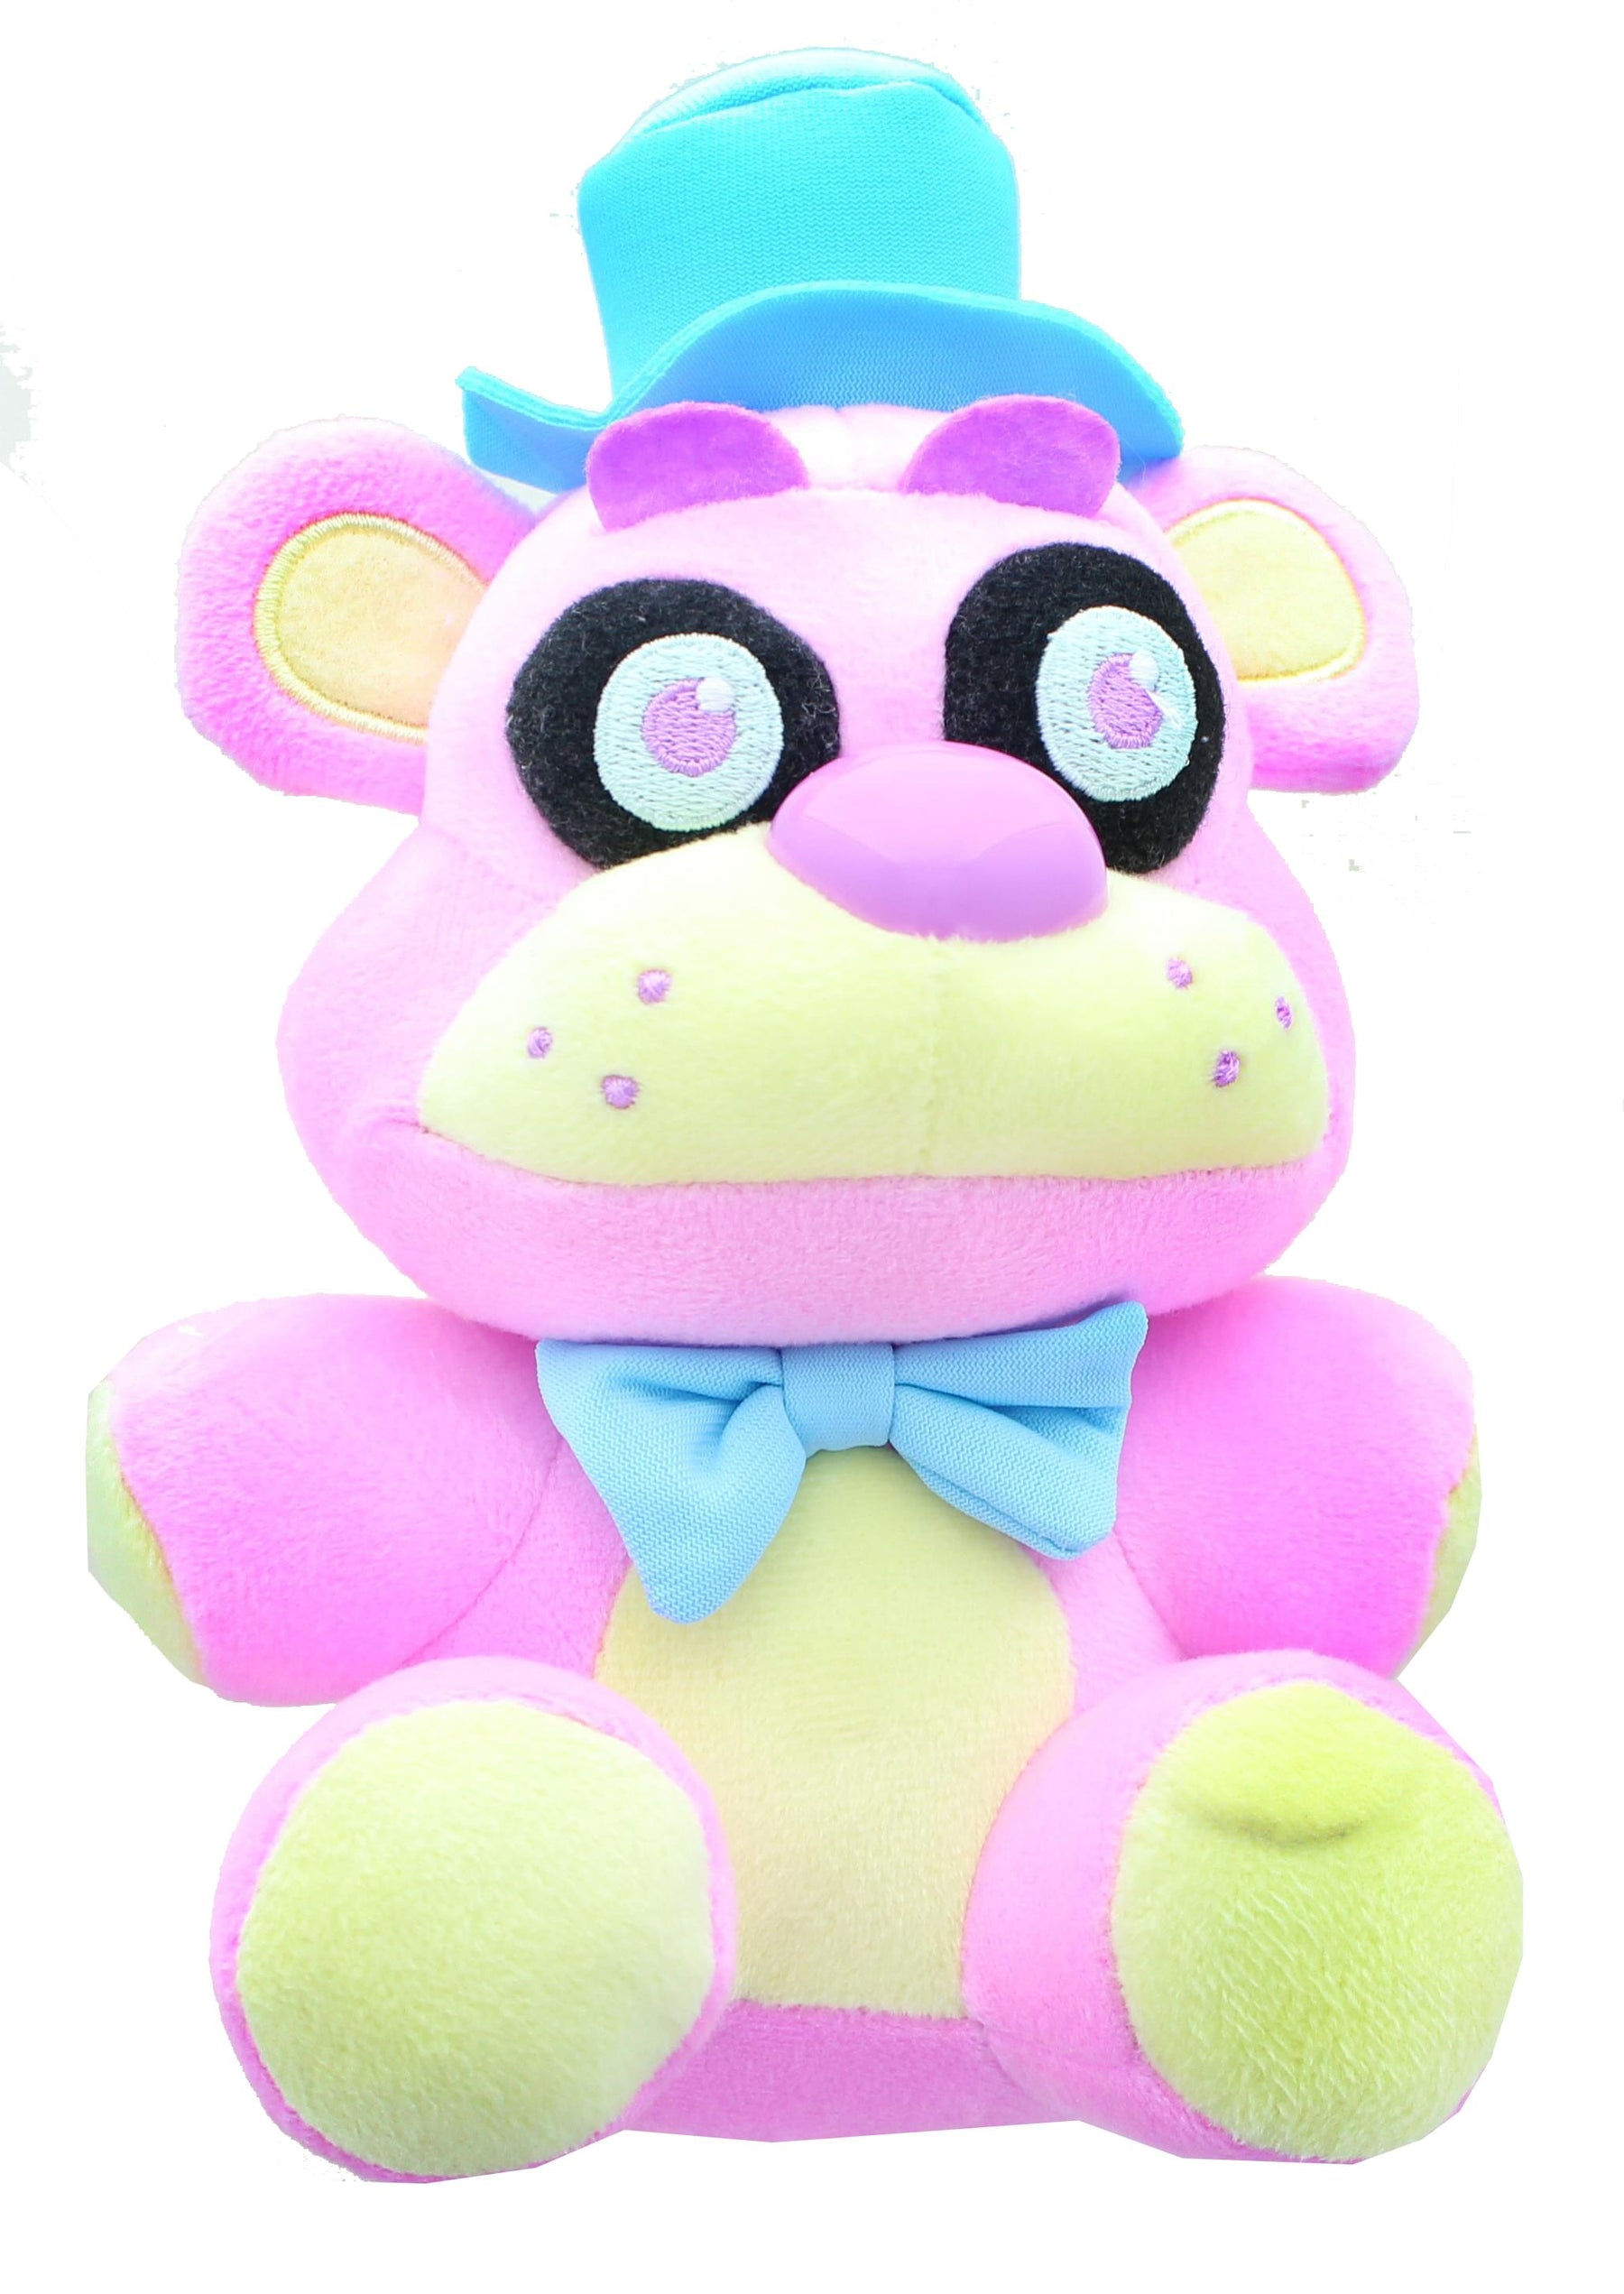 Funko Plush: Five Nights at Freddy's - Spring Colorway - Freddy (Pink) 